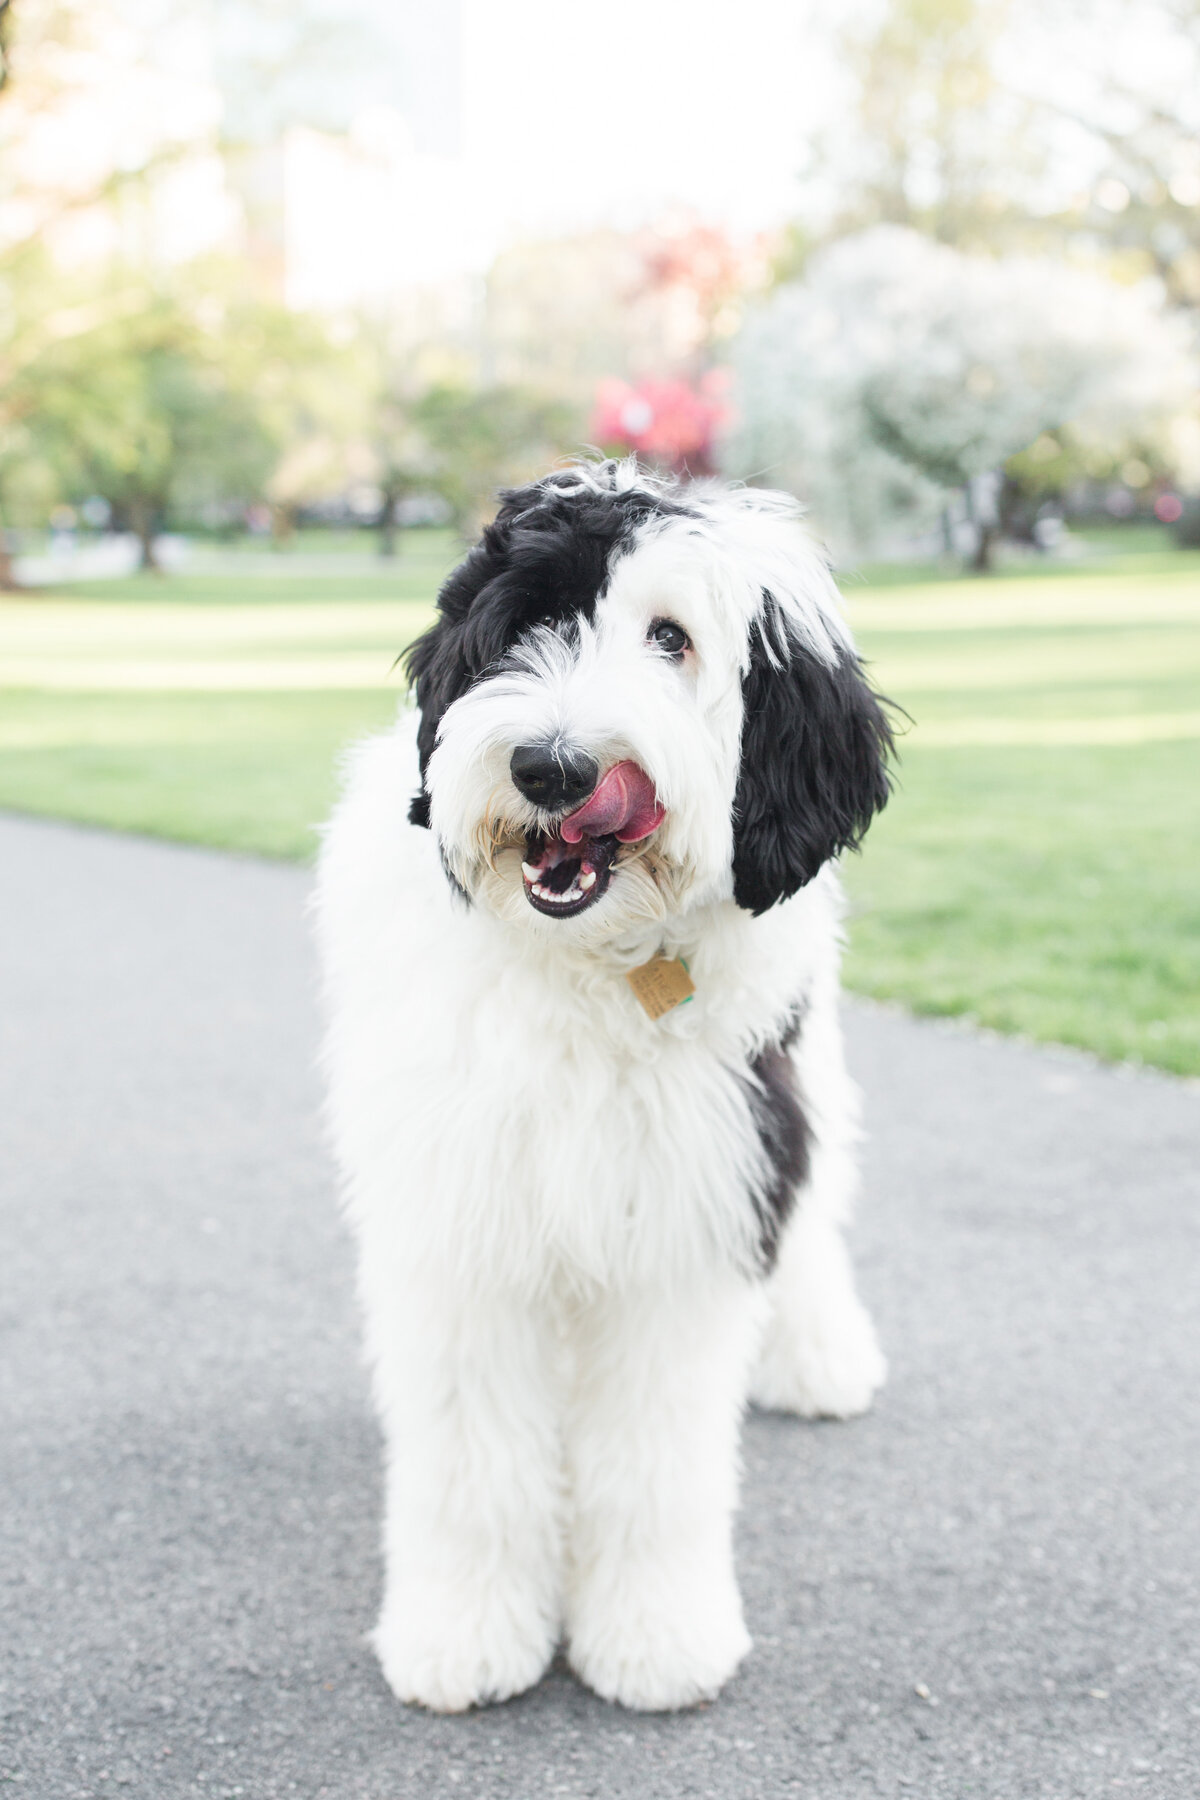 Sheepadoodle with tongue sticking out in Boston Public Garden